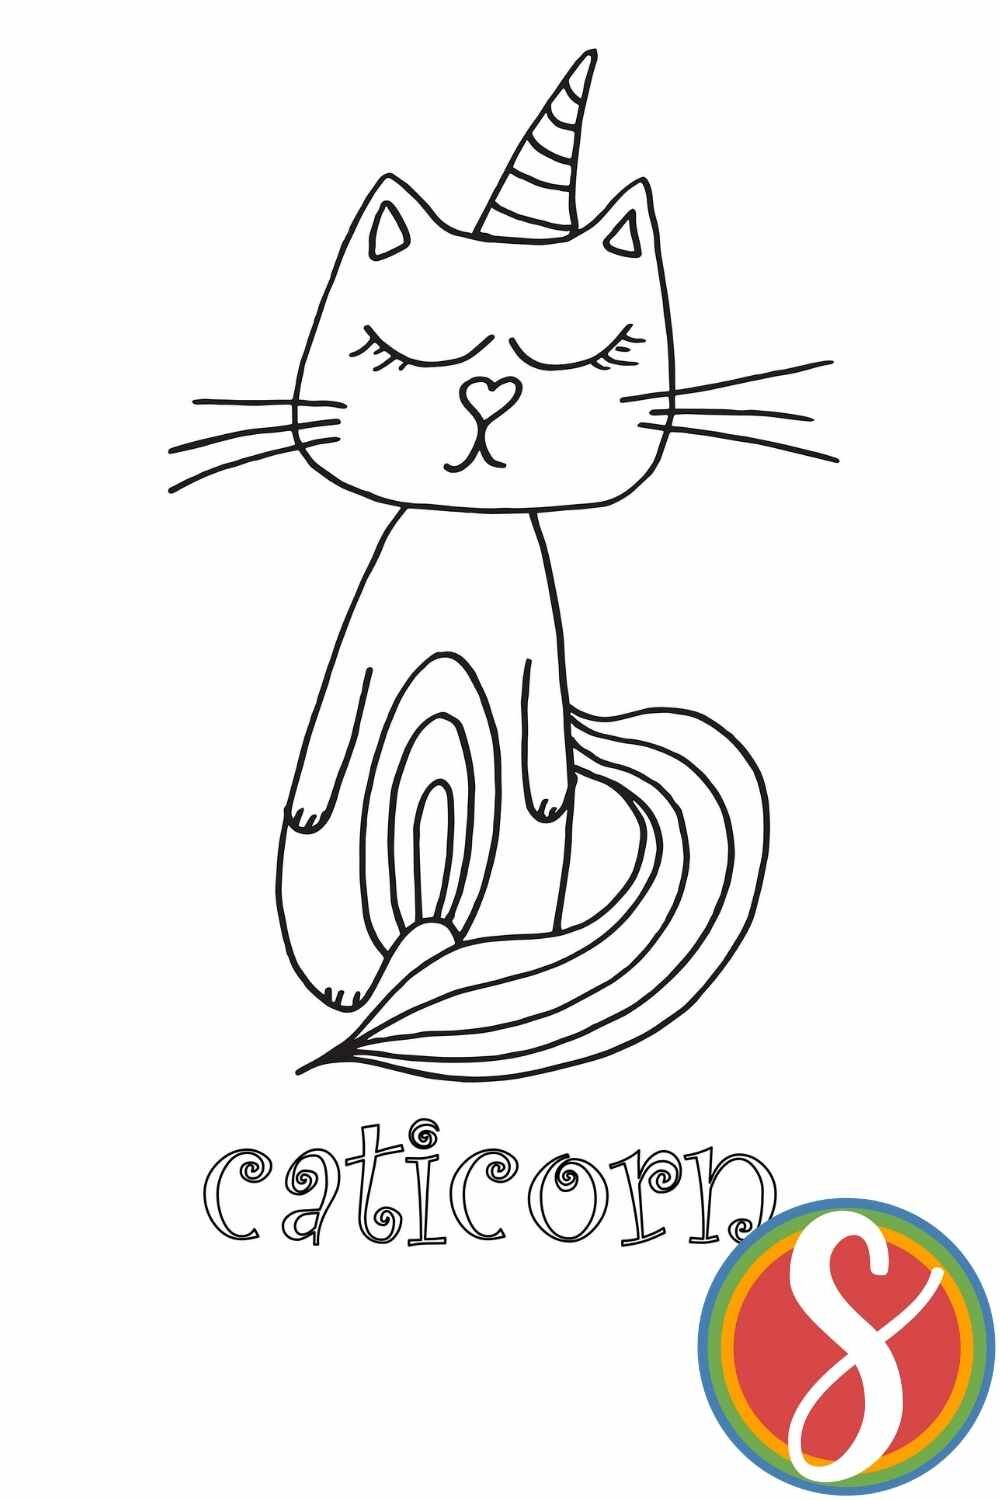 Free Caticorn unicorn coloring - print and color this page free from Stevie Doodles